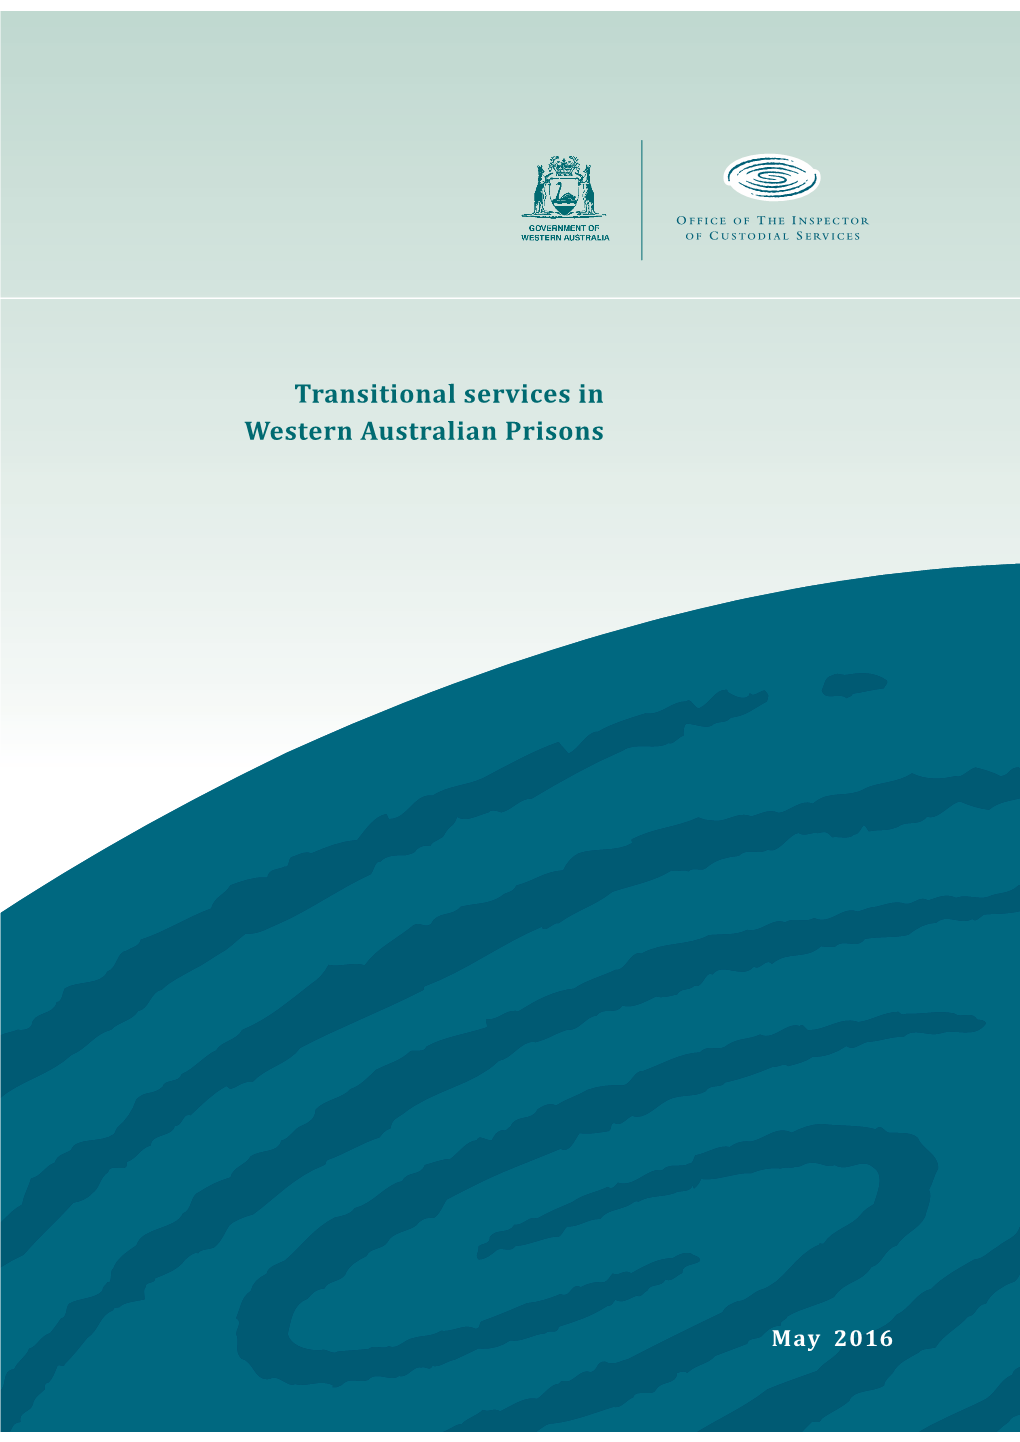 Transitional Services in Western Australian Prisons